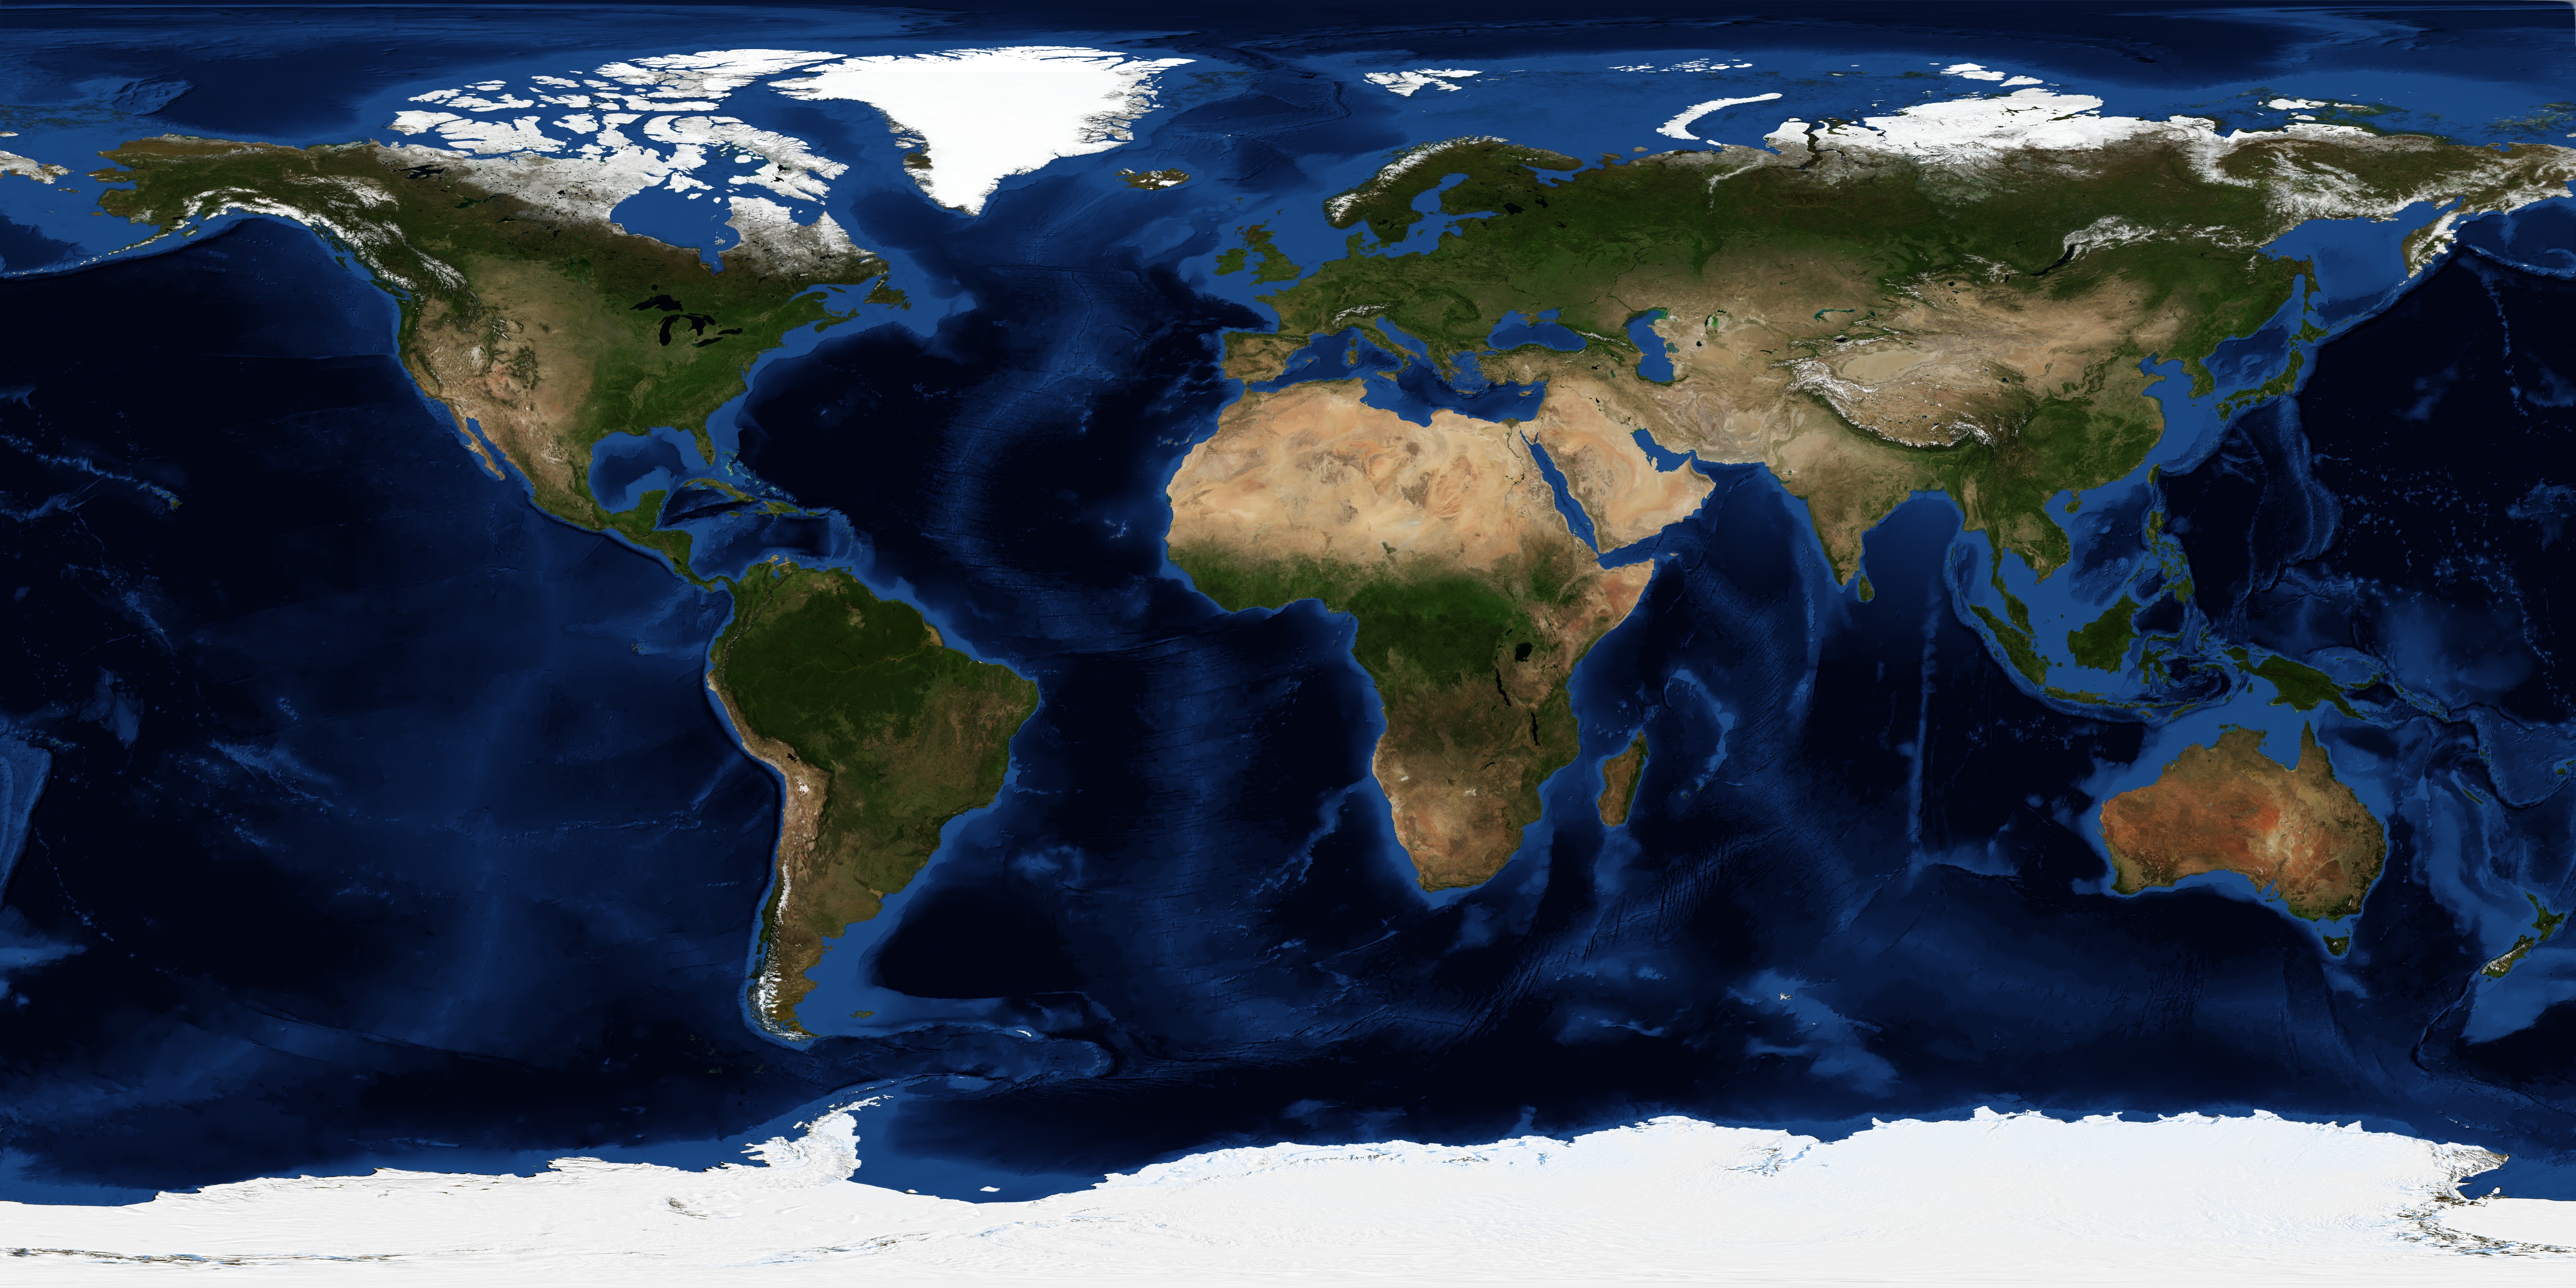 June, Blue Marble Next Generation w/ Topography and Bathymetry - related image preview